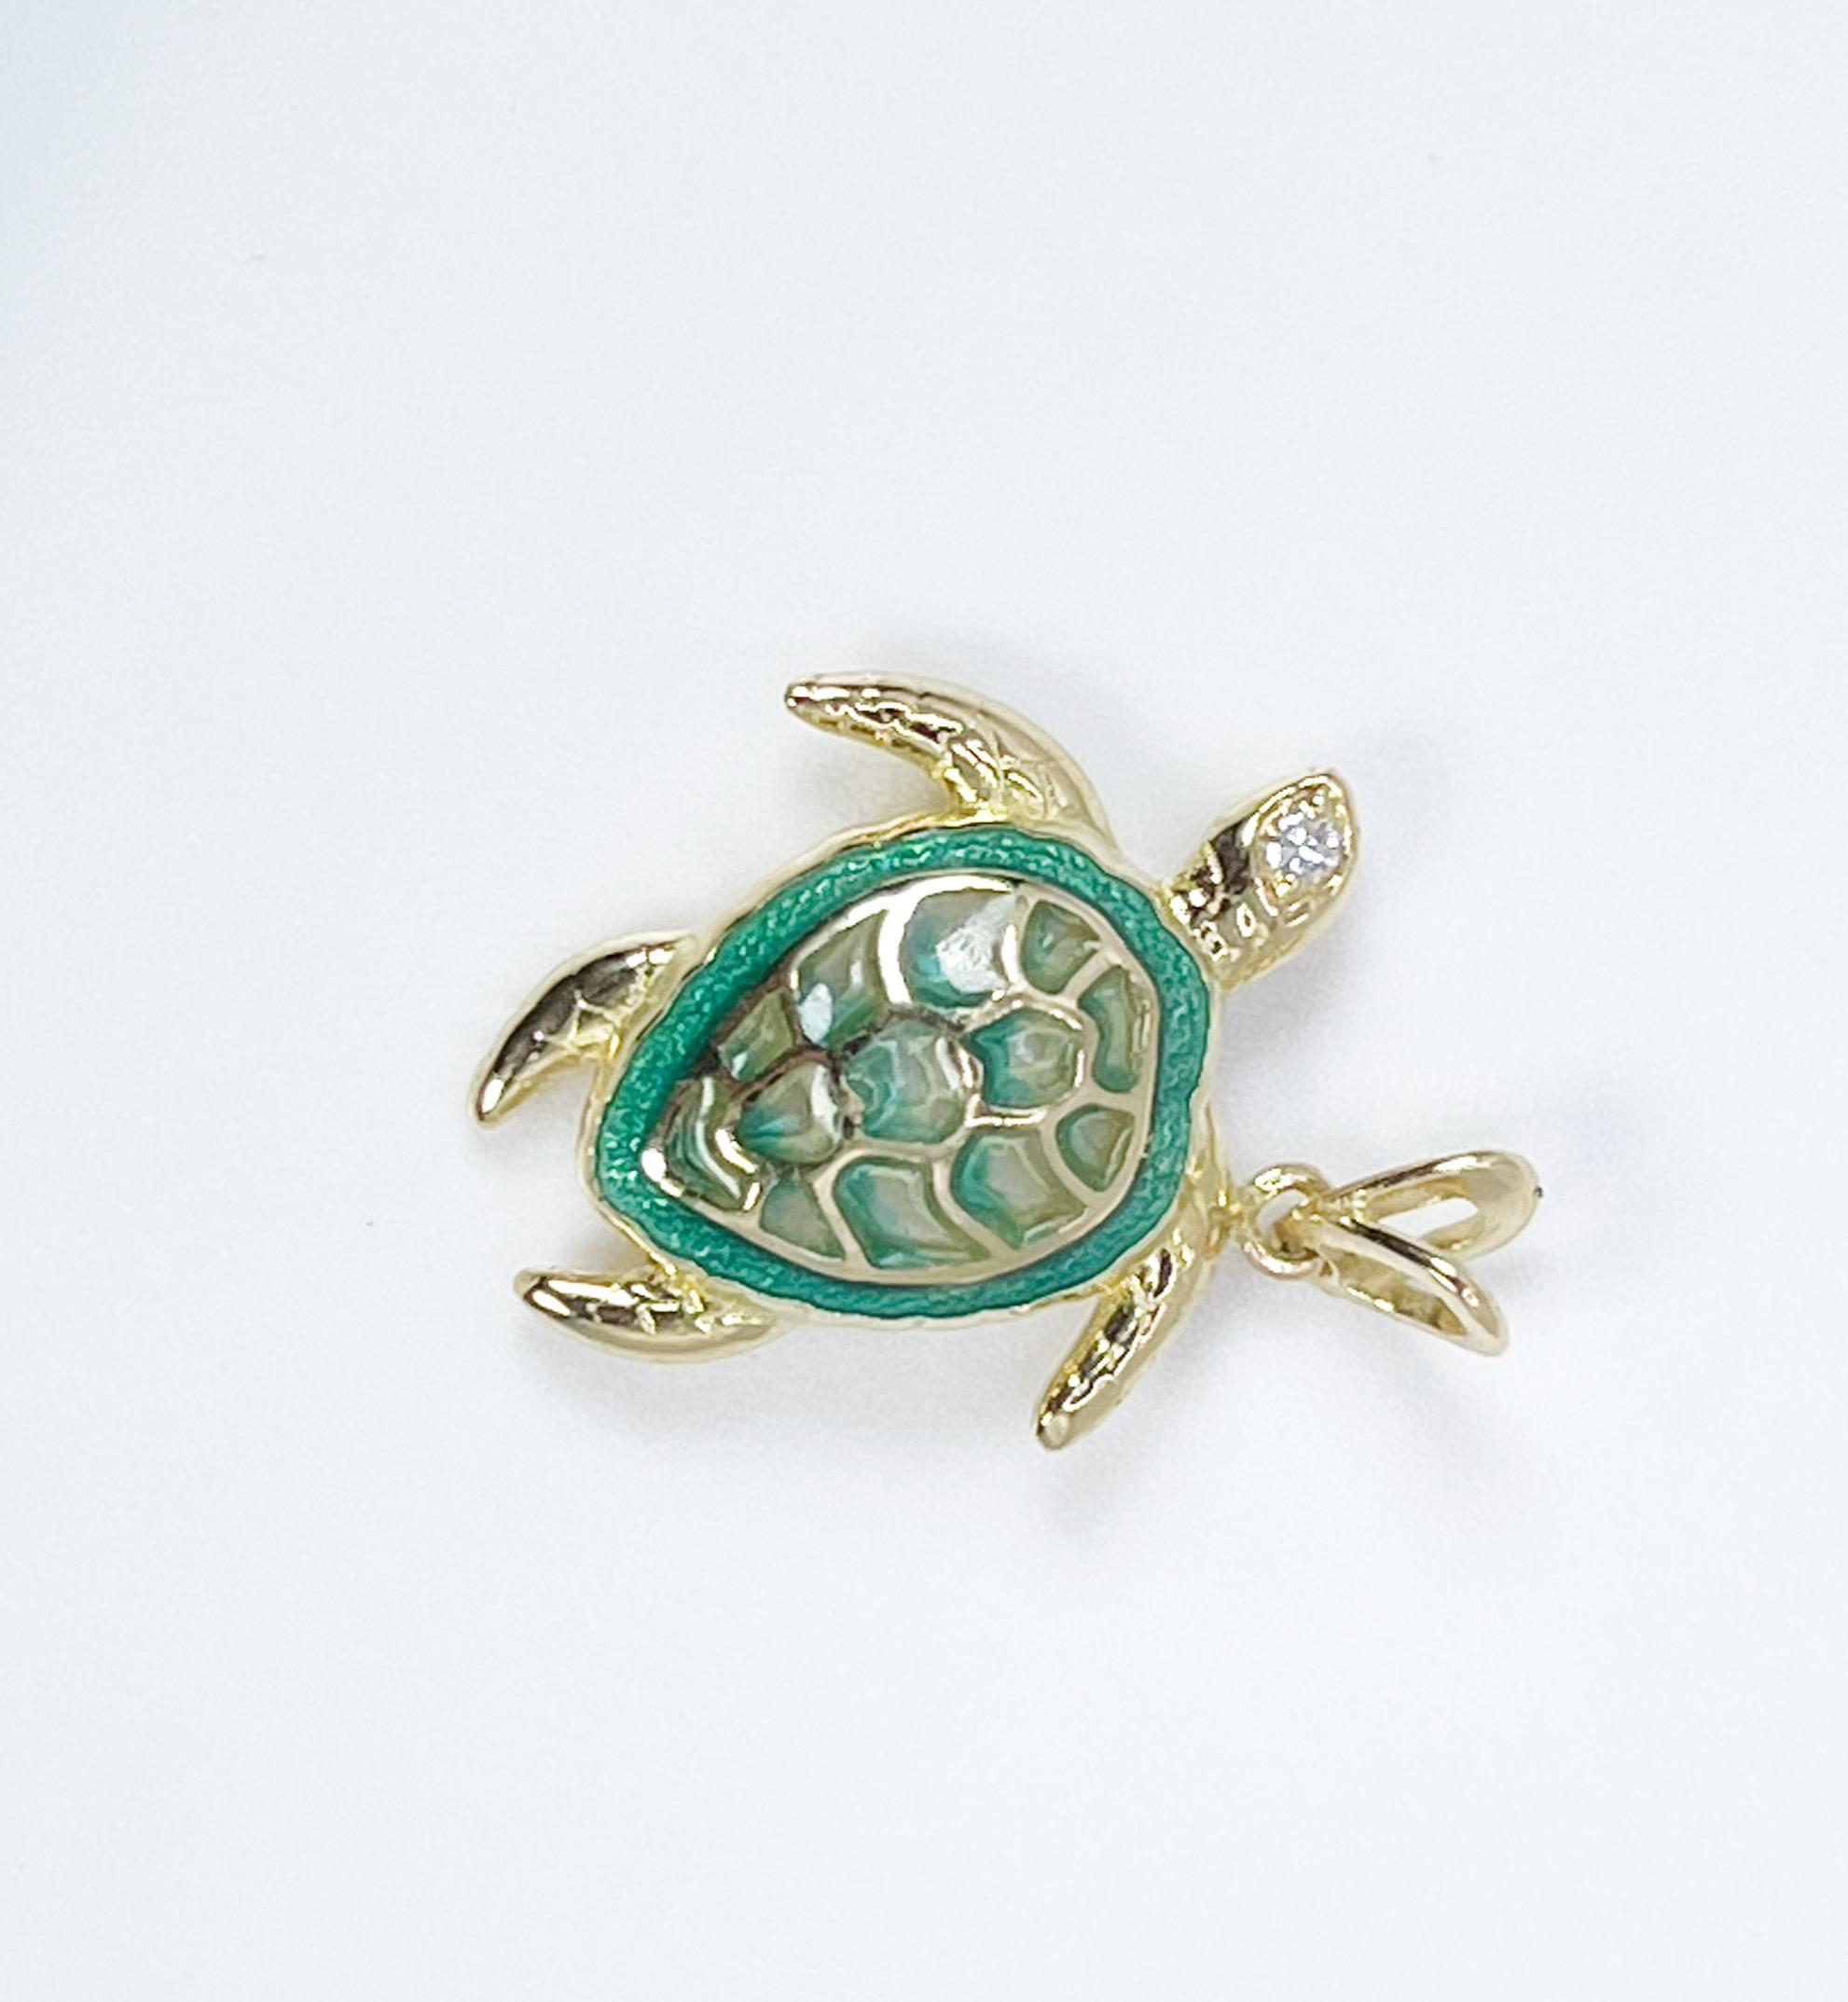 Exquisite and rare vitreous green enamel sea turtle pendant in 18KT yellow gold accompanied by a center diamond 1.8mm. Pendant is unisex.

GRAM WEIGHT (pendant only): 2.90gr
GOLD: 18KT yellow gold
CHAIN: 18